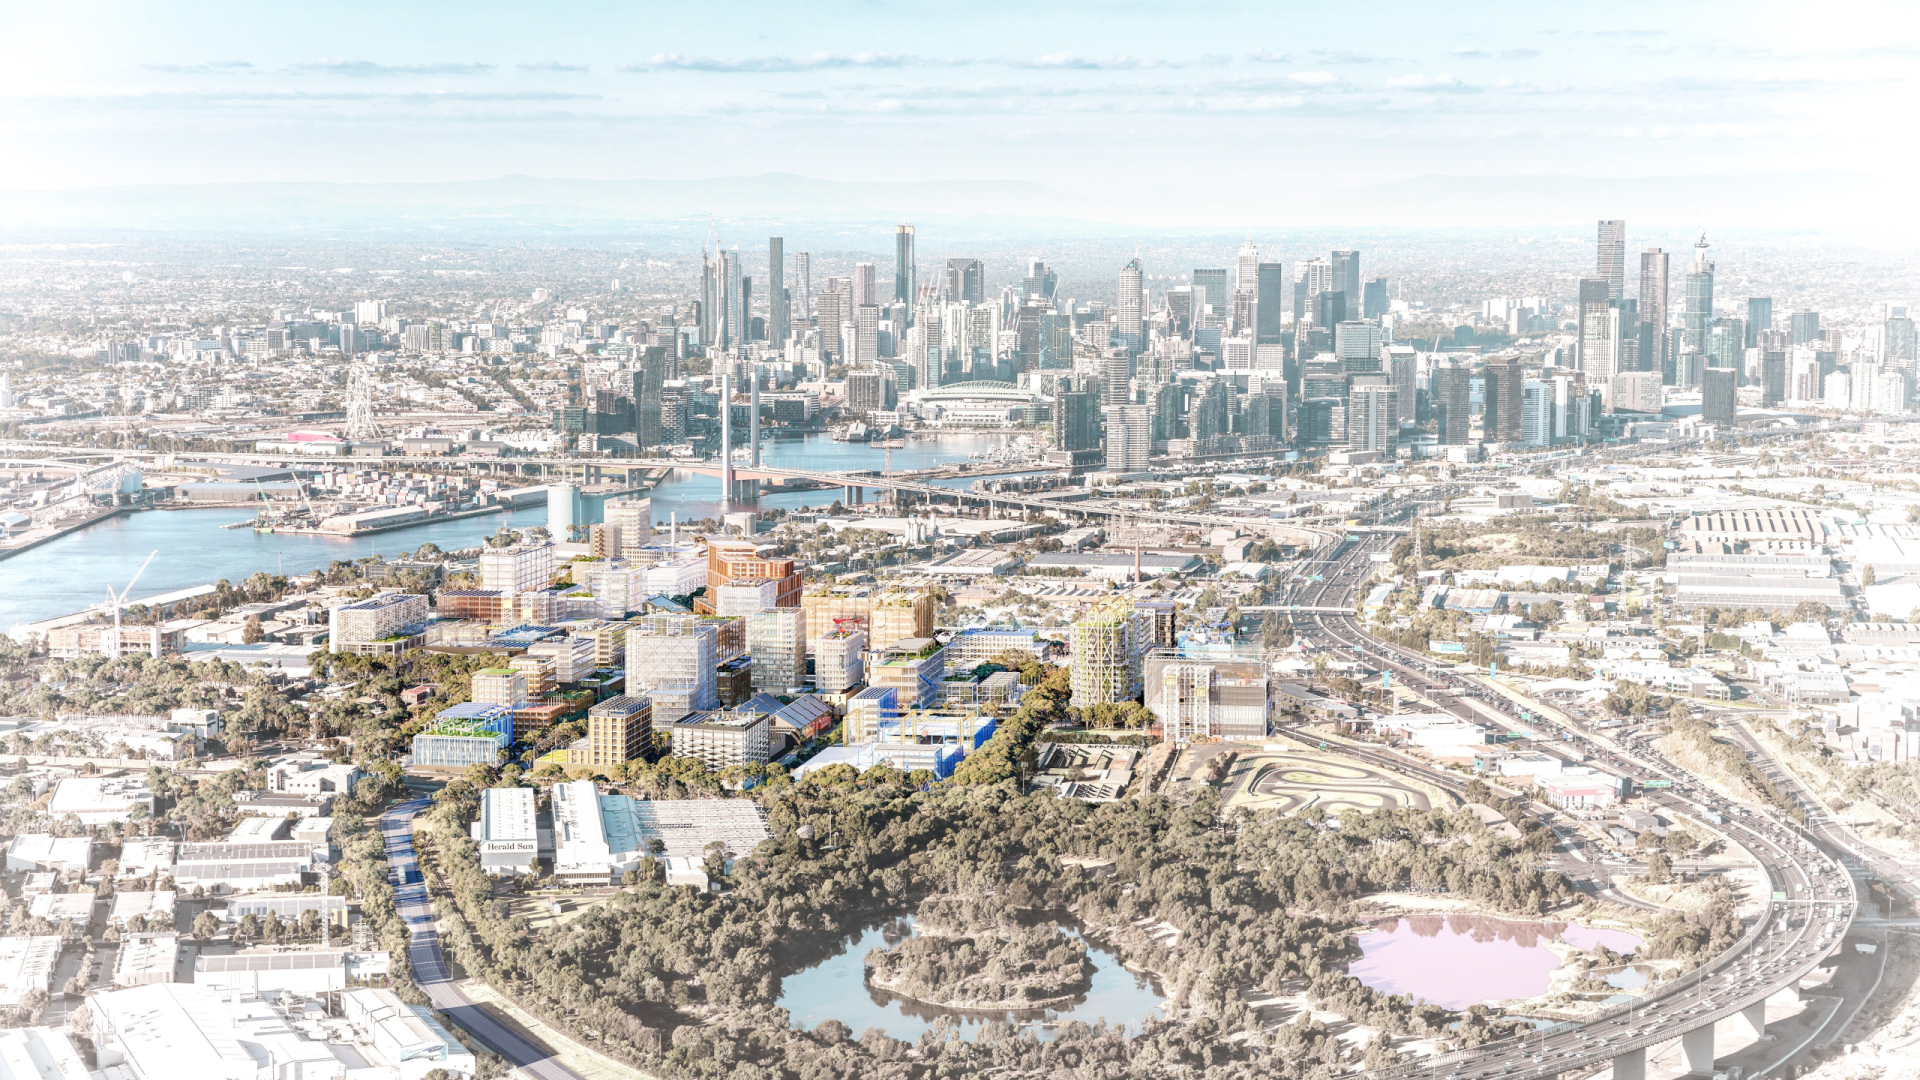 Aerial view of the Innovation Precinct in Fishermans Bend, approx. four kilometres from the CBD (digital render). Artists impression year 2050.